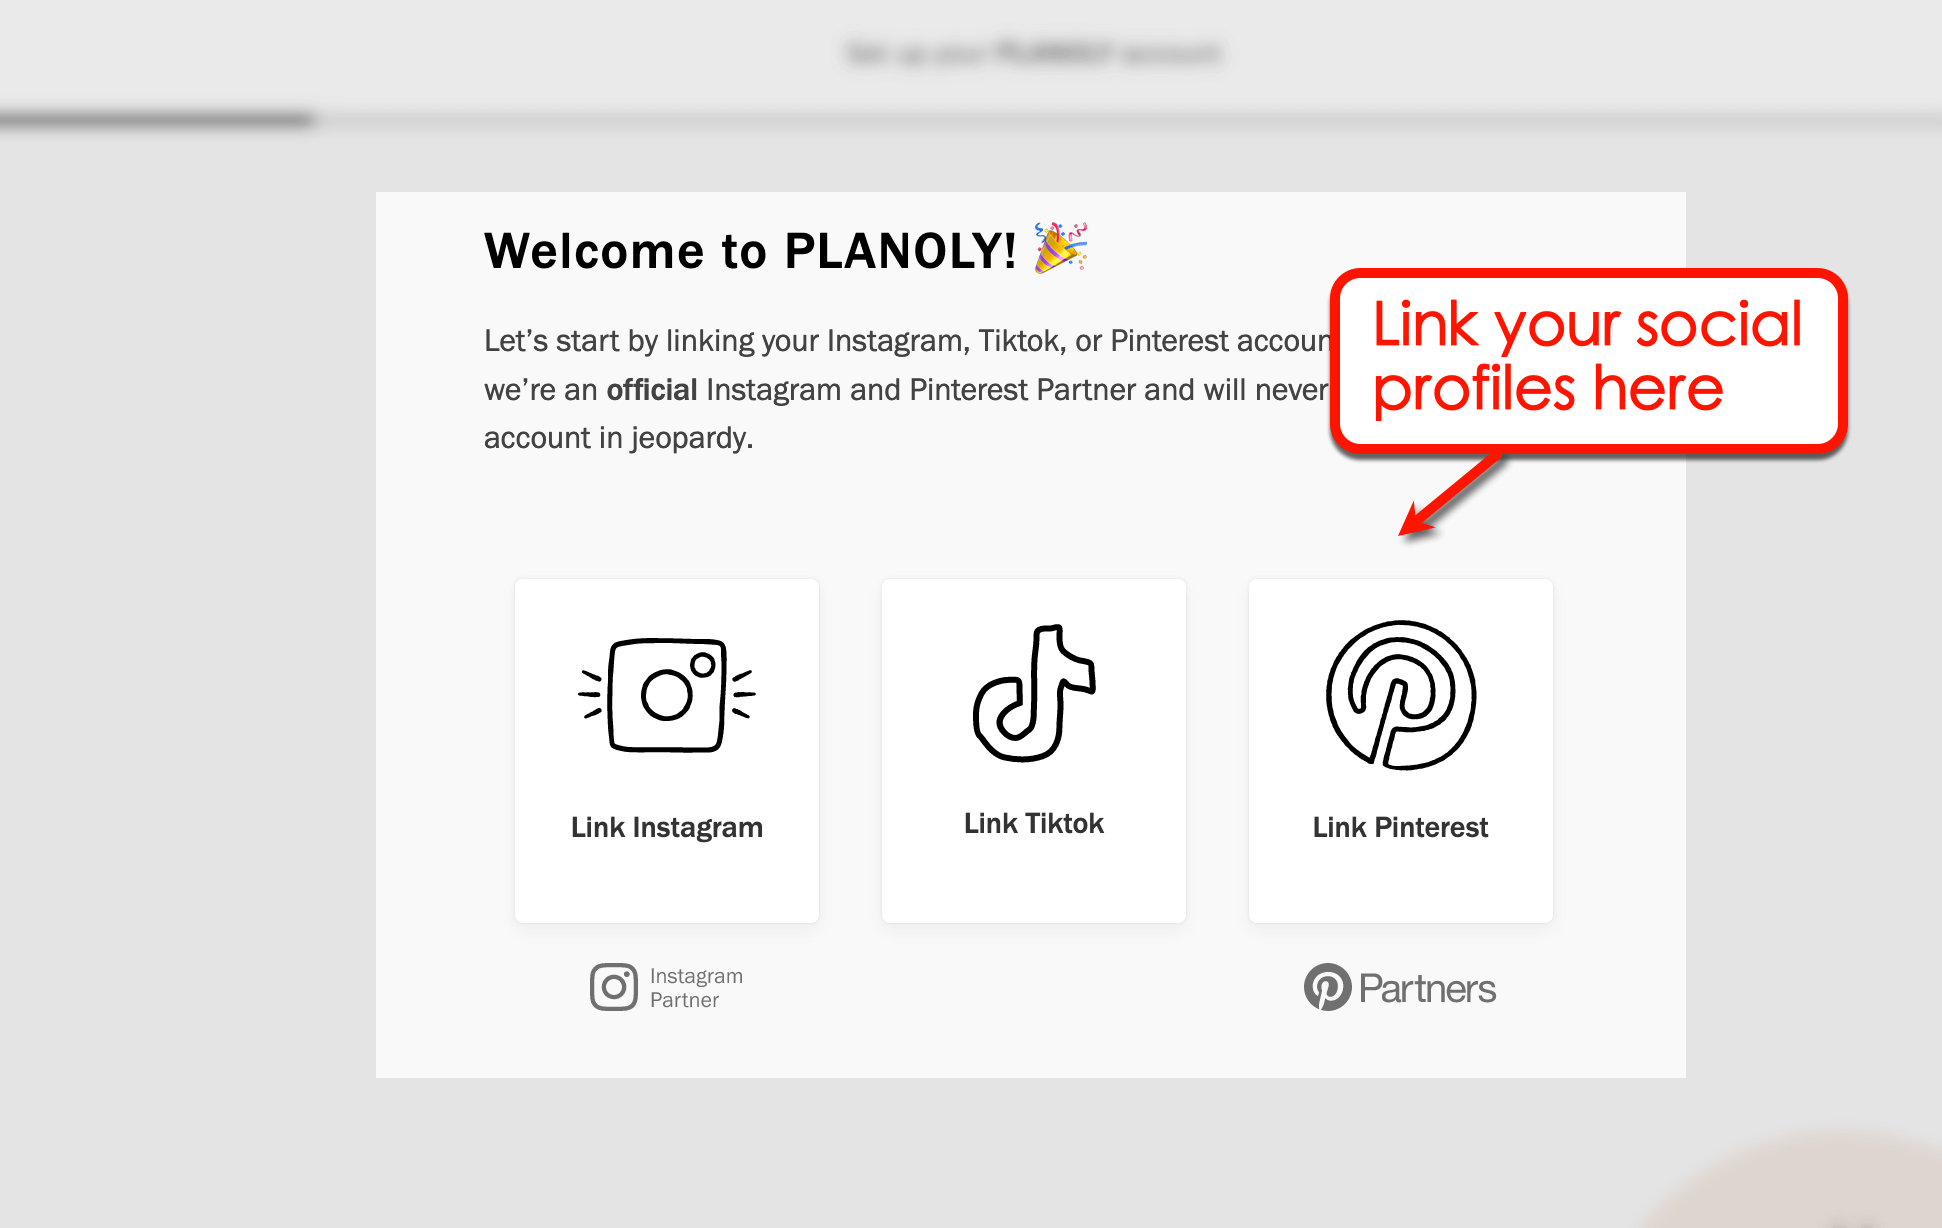 Link your social profiles in Planoly